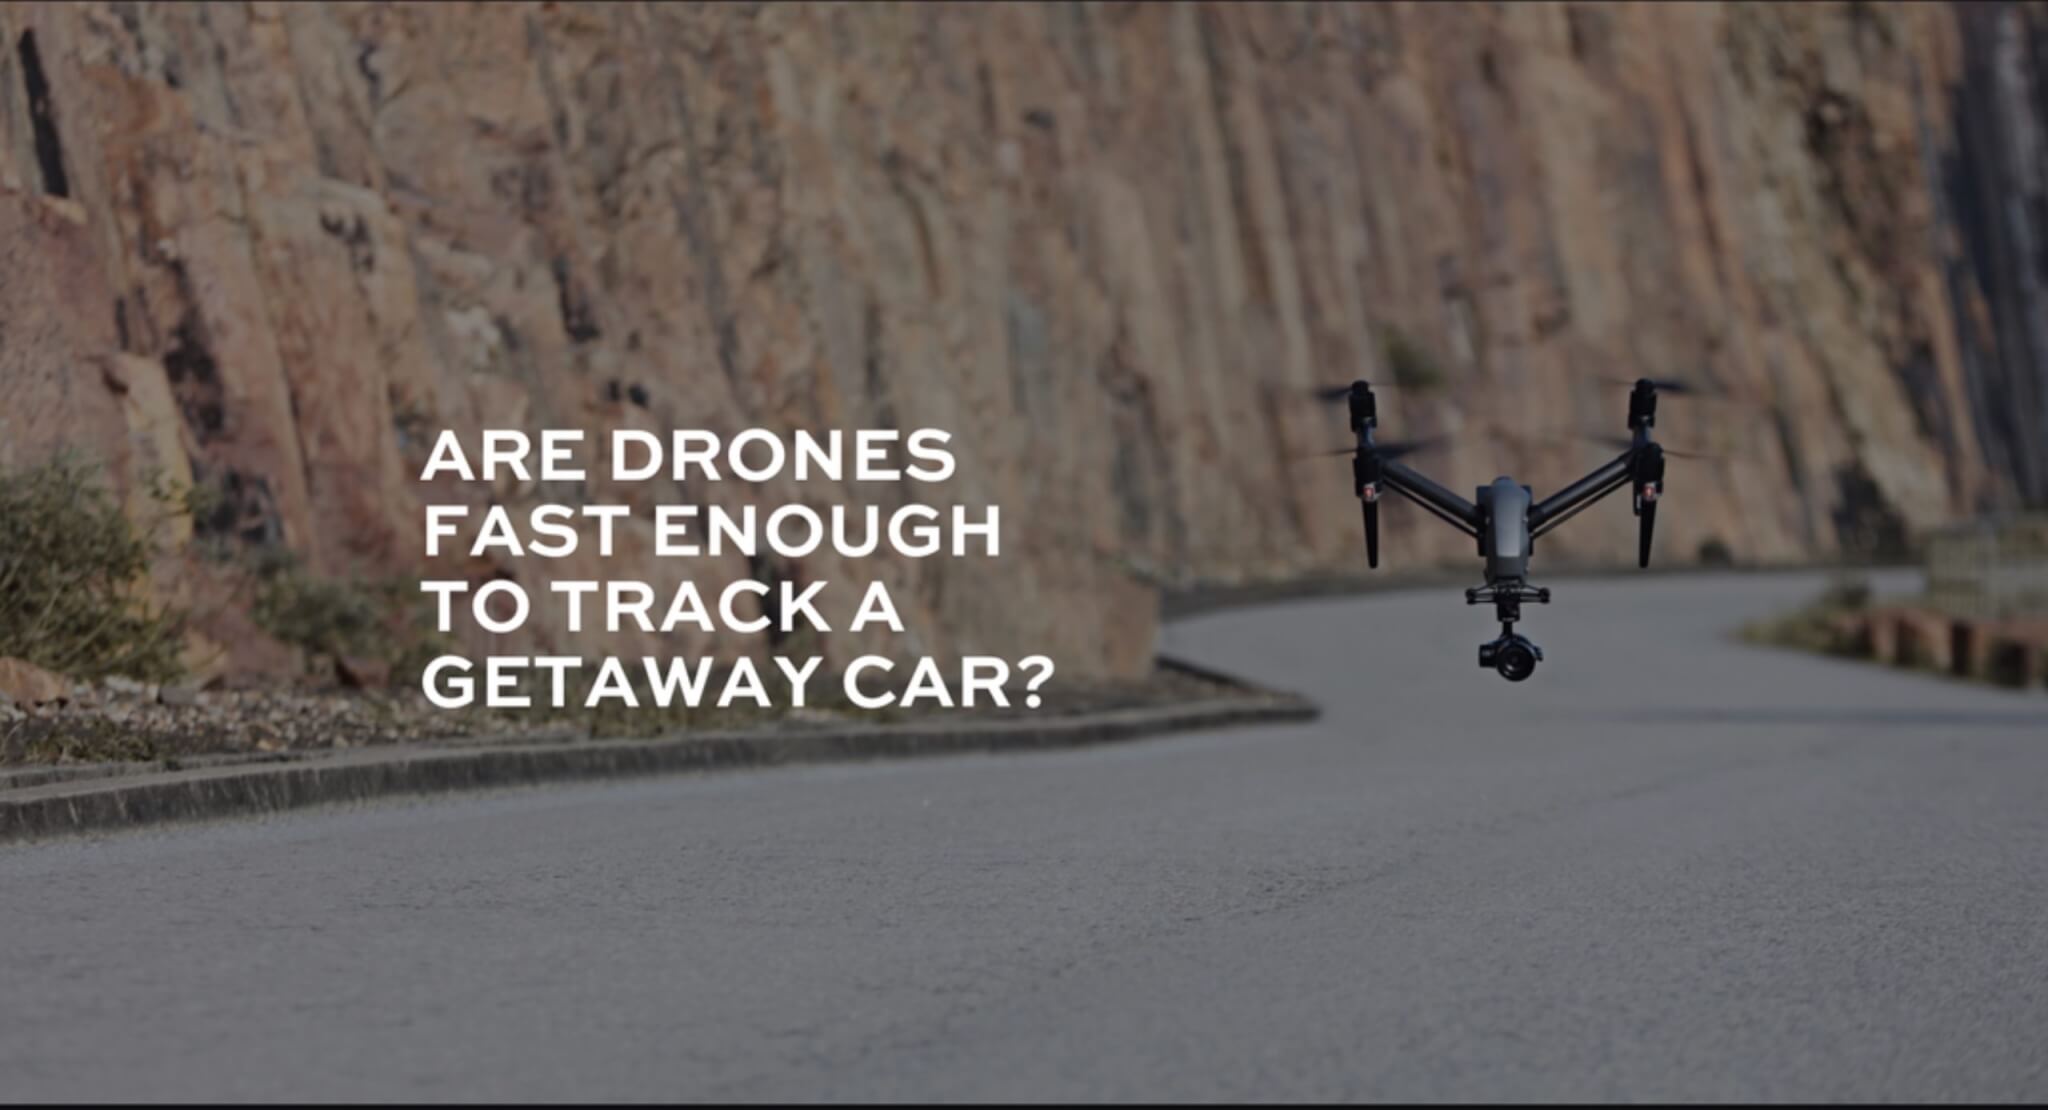 Speed of drones in car chase